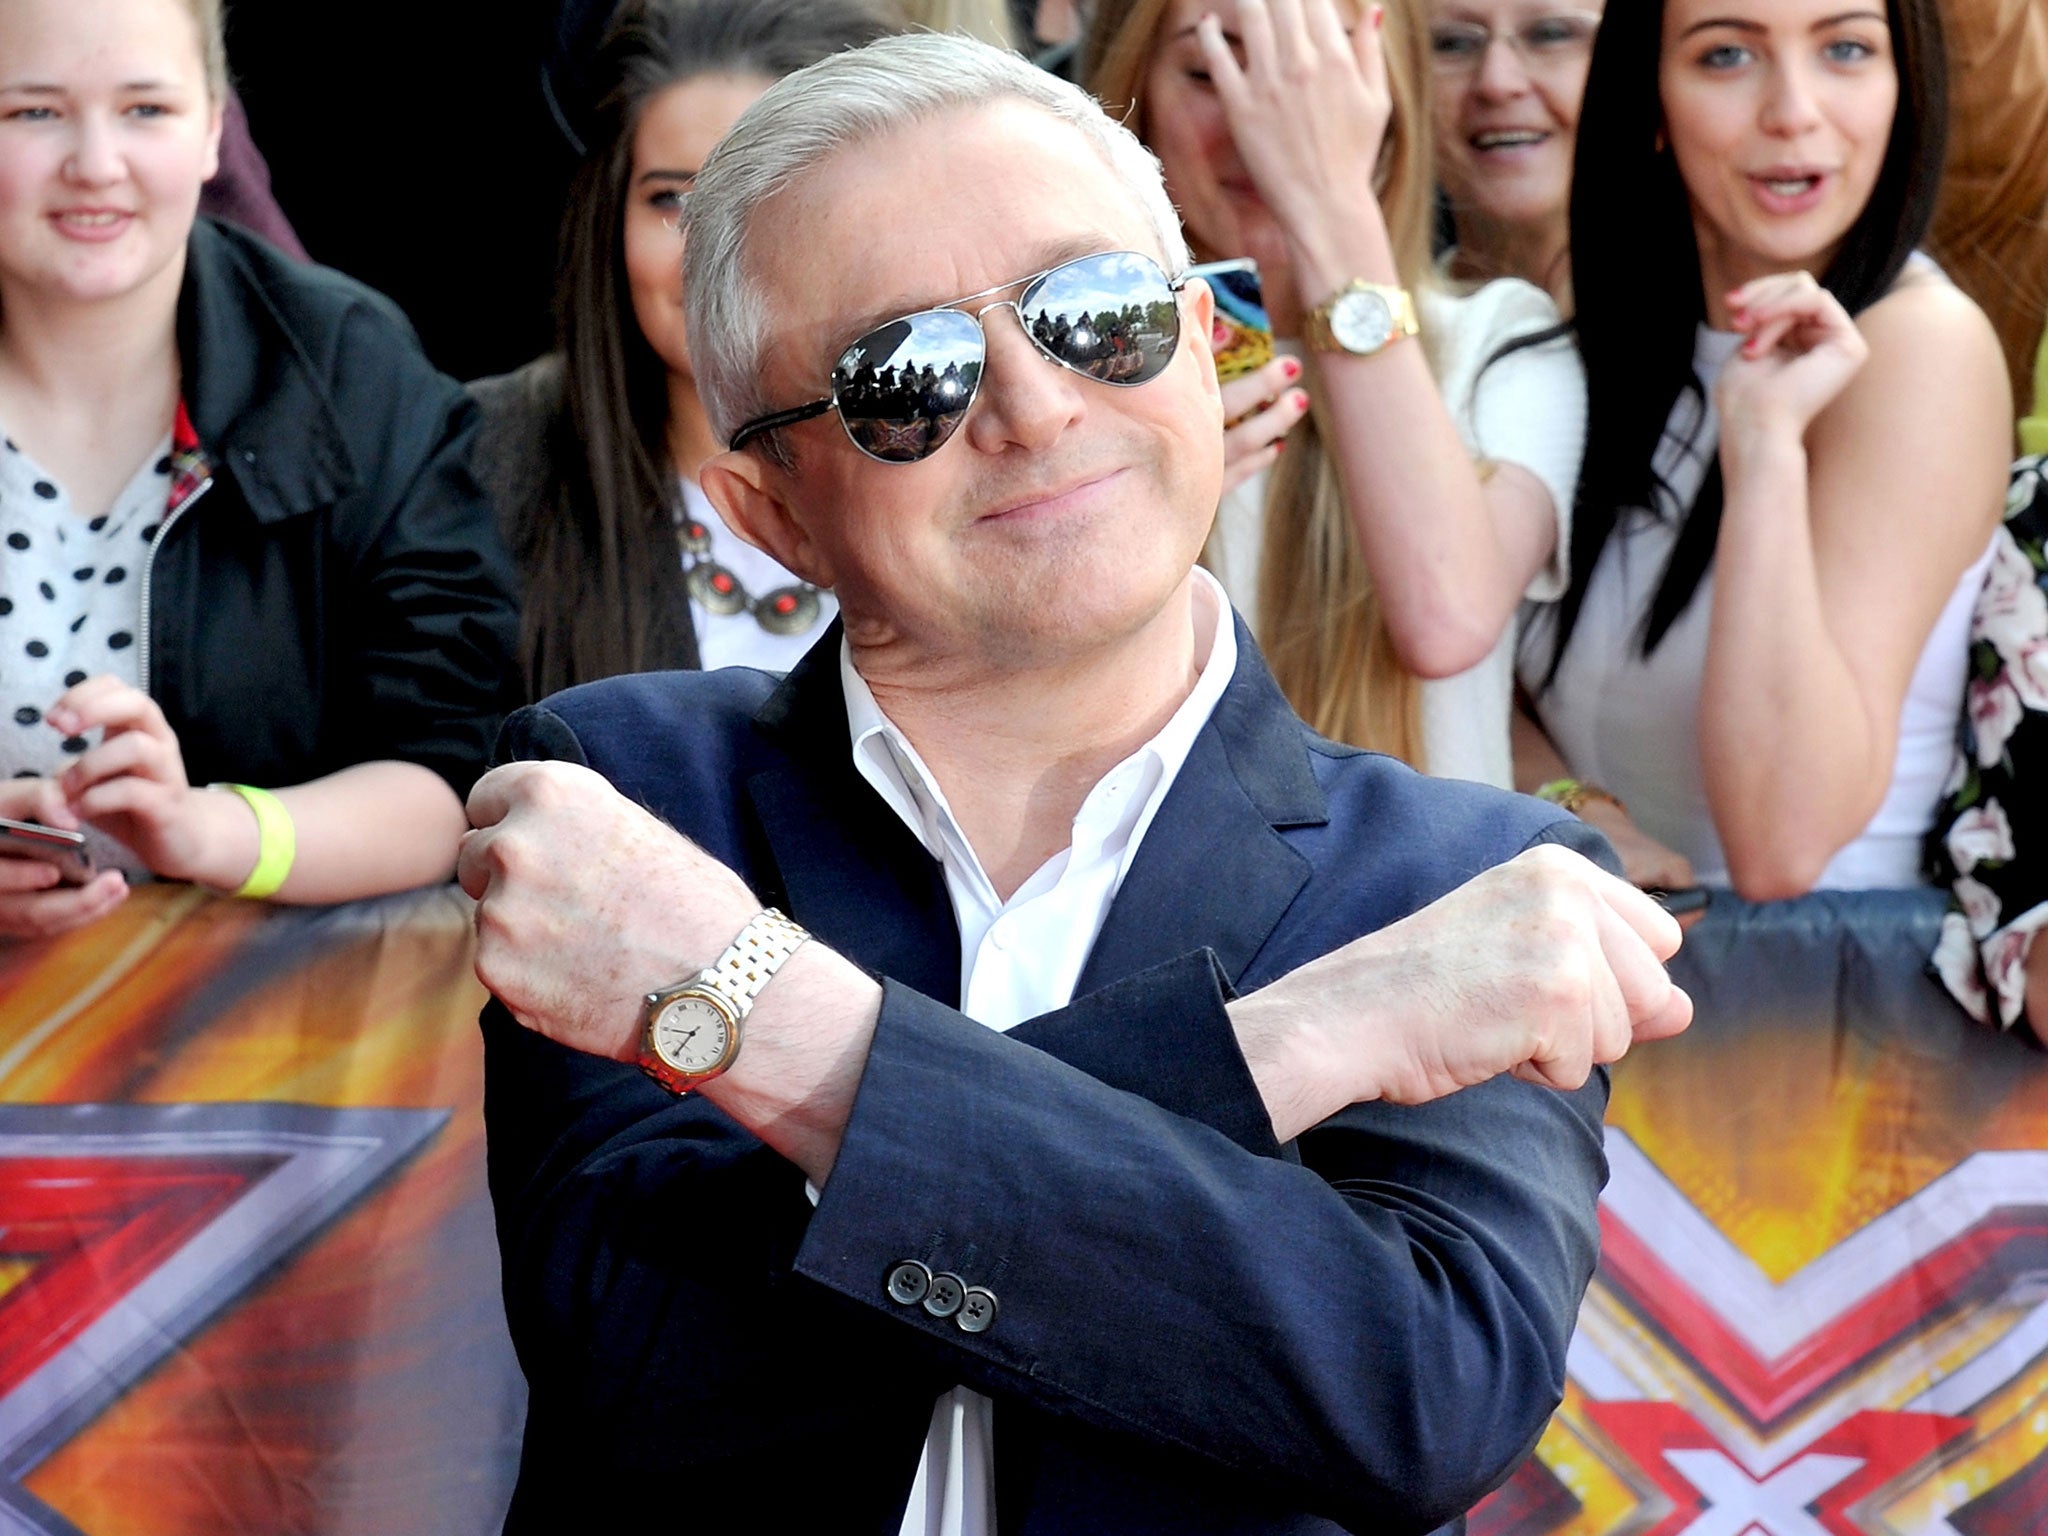 Louis Walsh's X Factor judging days are over